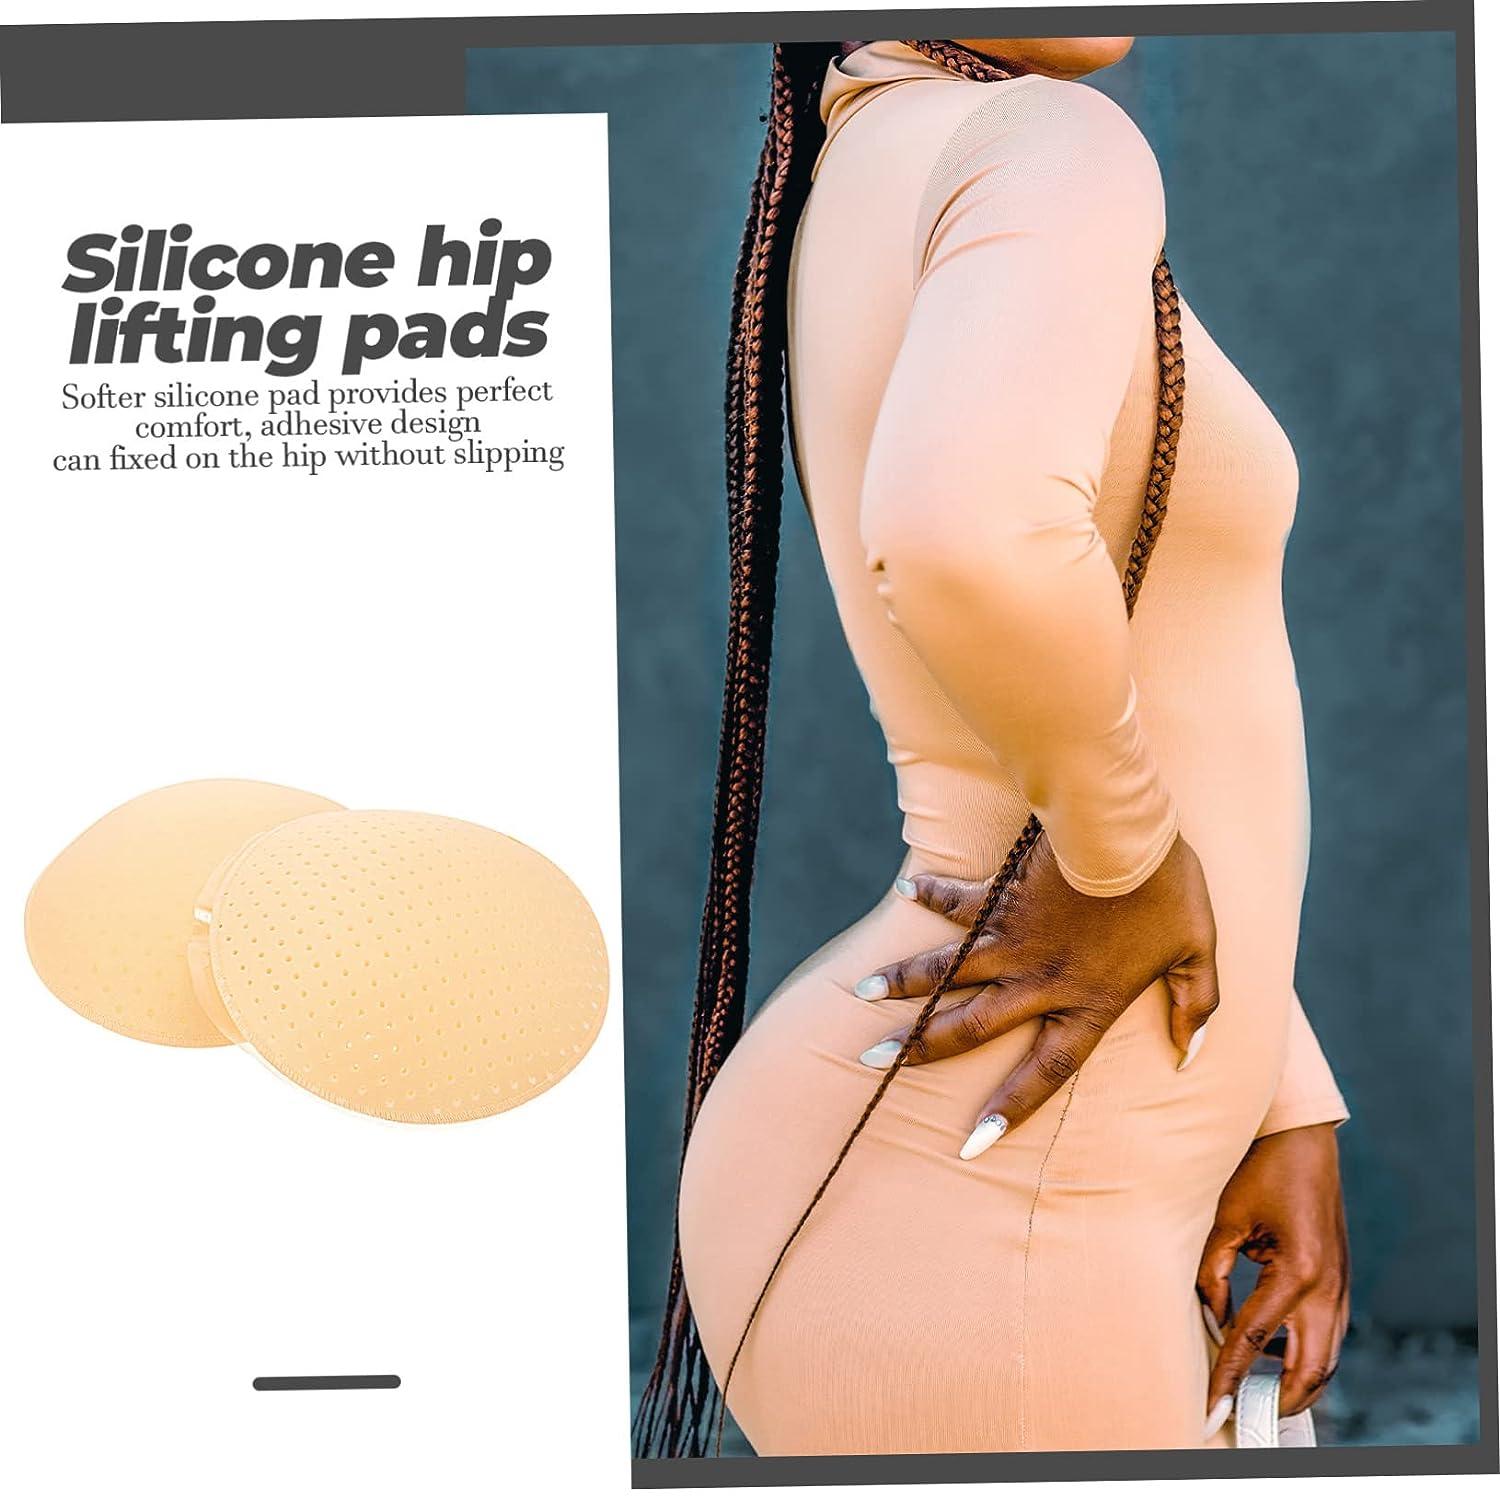 These are our silicone hip pads and how they work #paddedshapewear #hi